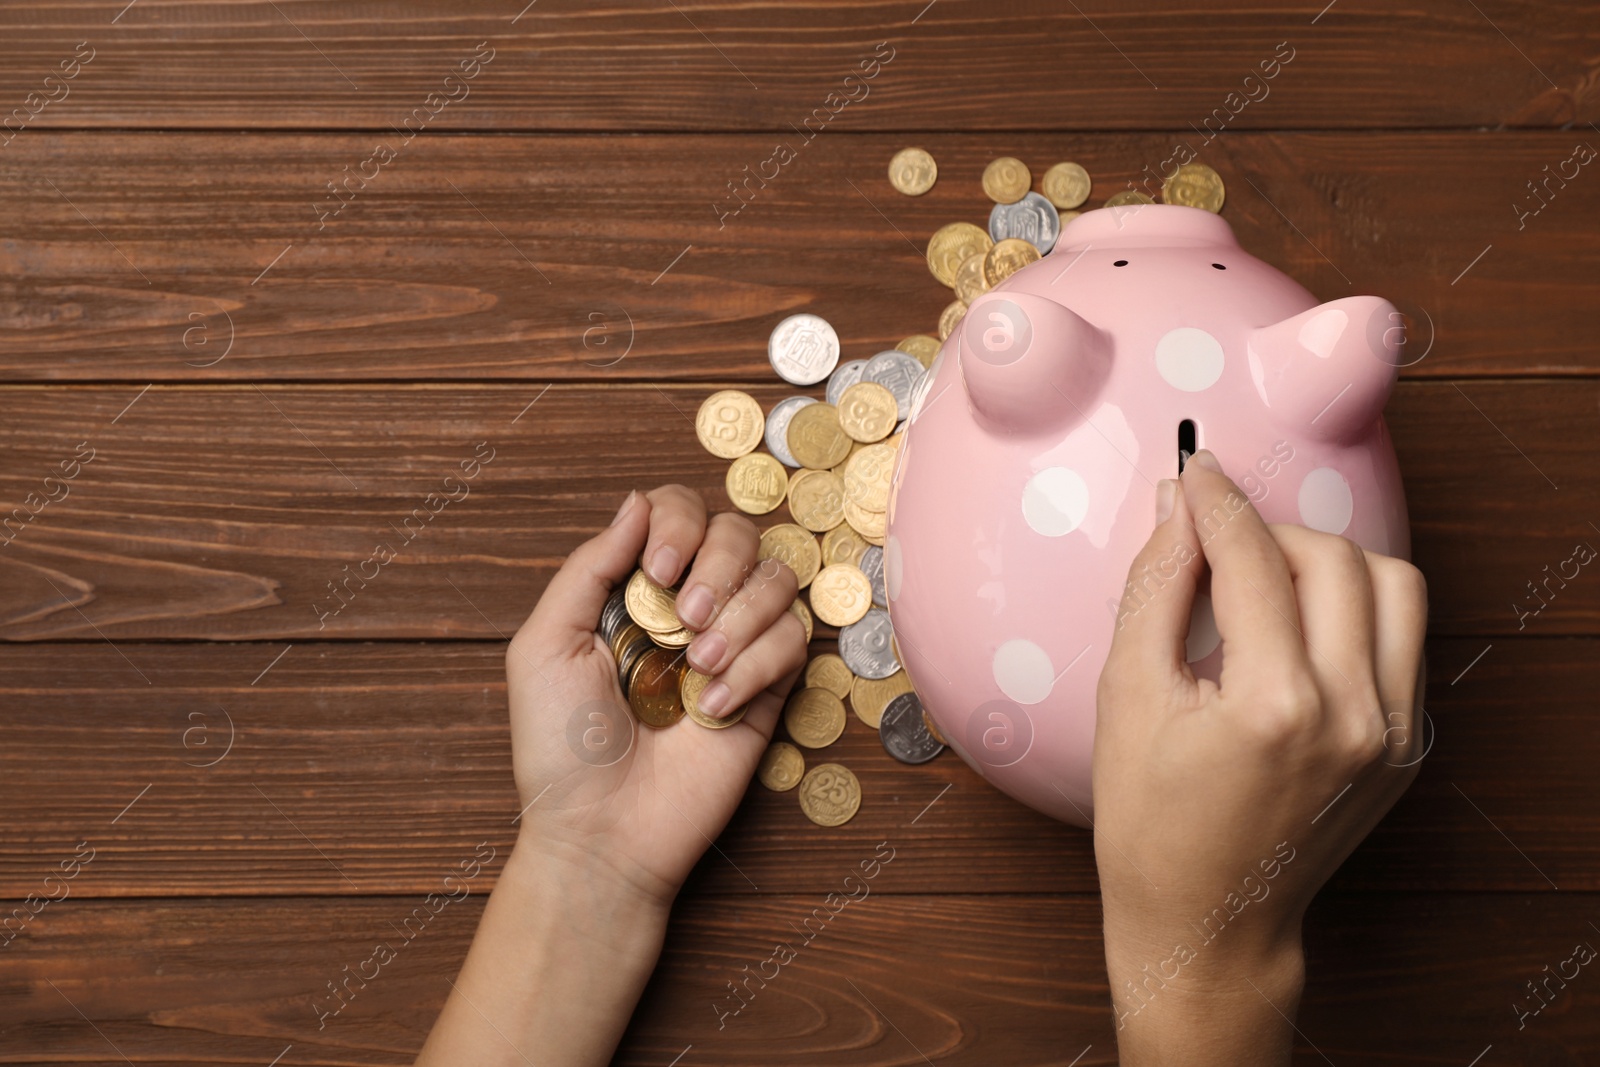 Photo of Woman putting coin into piggy bank on wooden background, top view